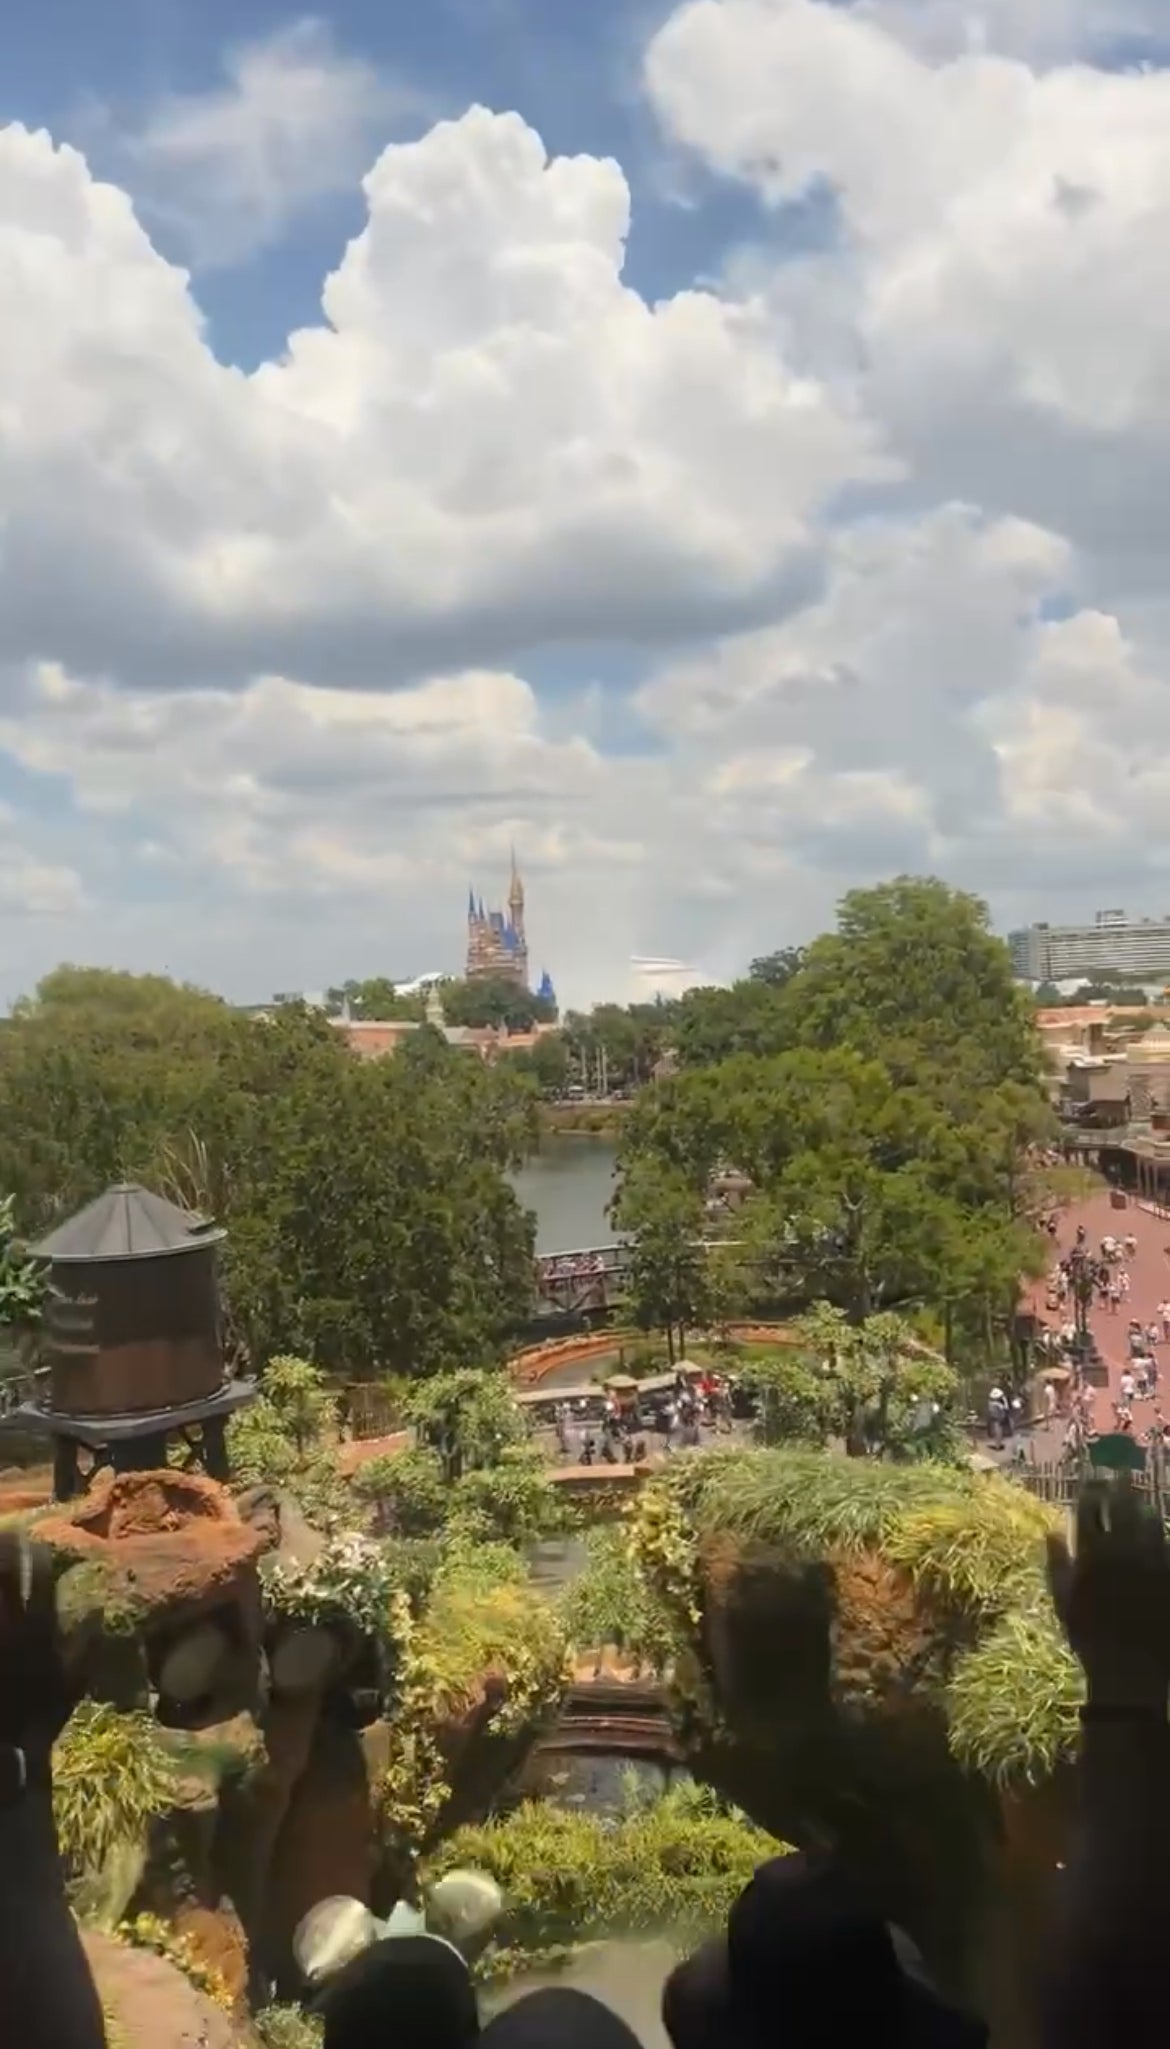 Wide view of a theme park with a river, greenery, and people walking; the distant castle suggests a Disney park